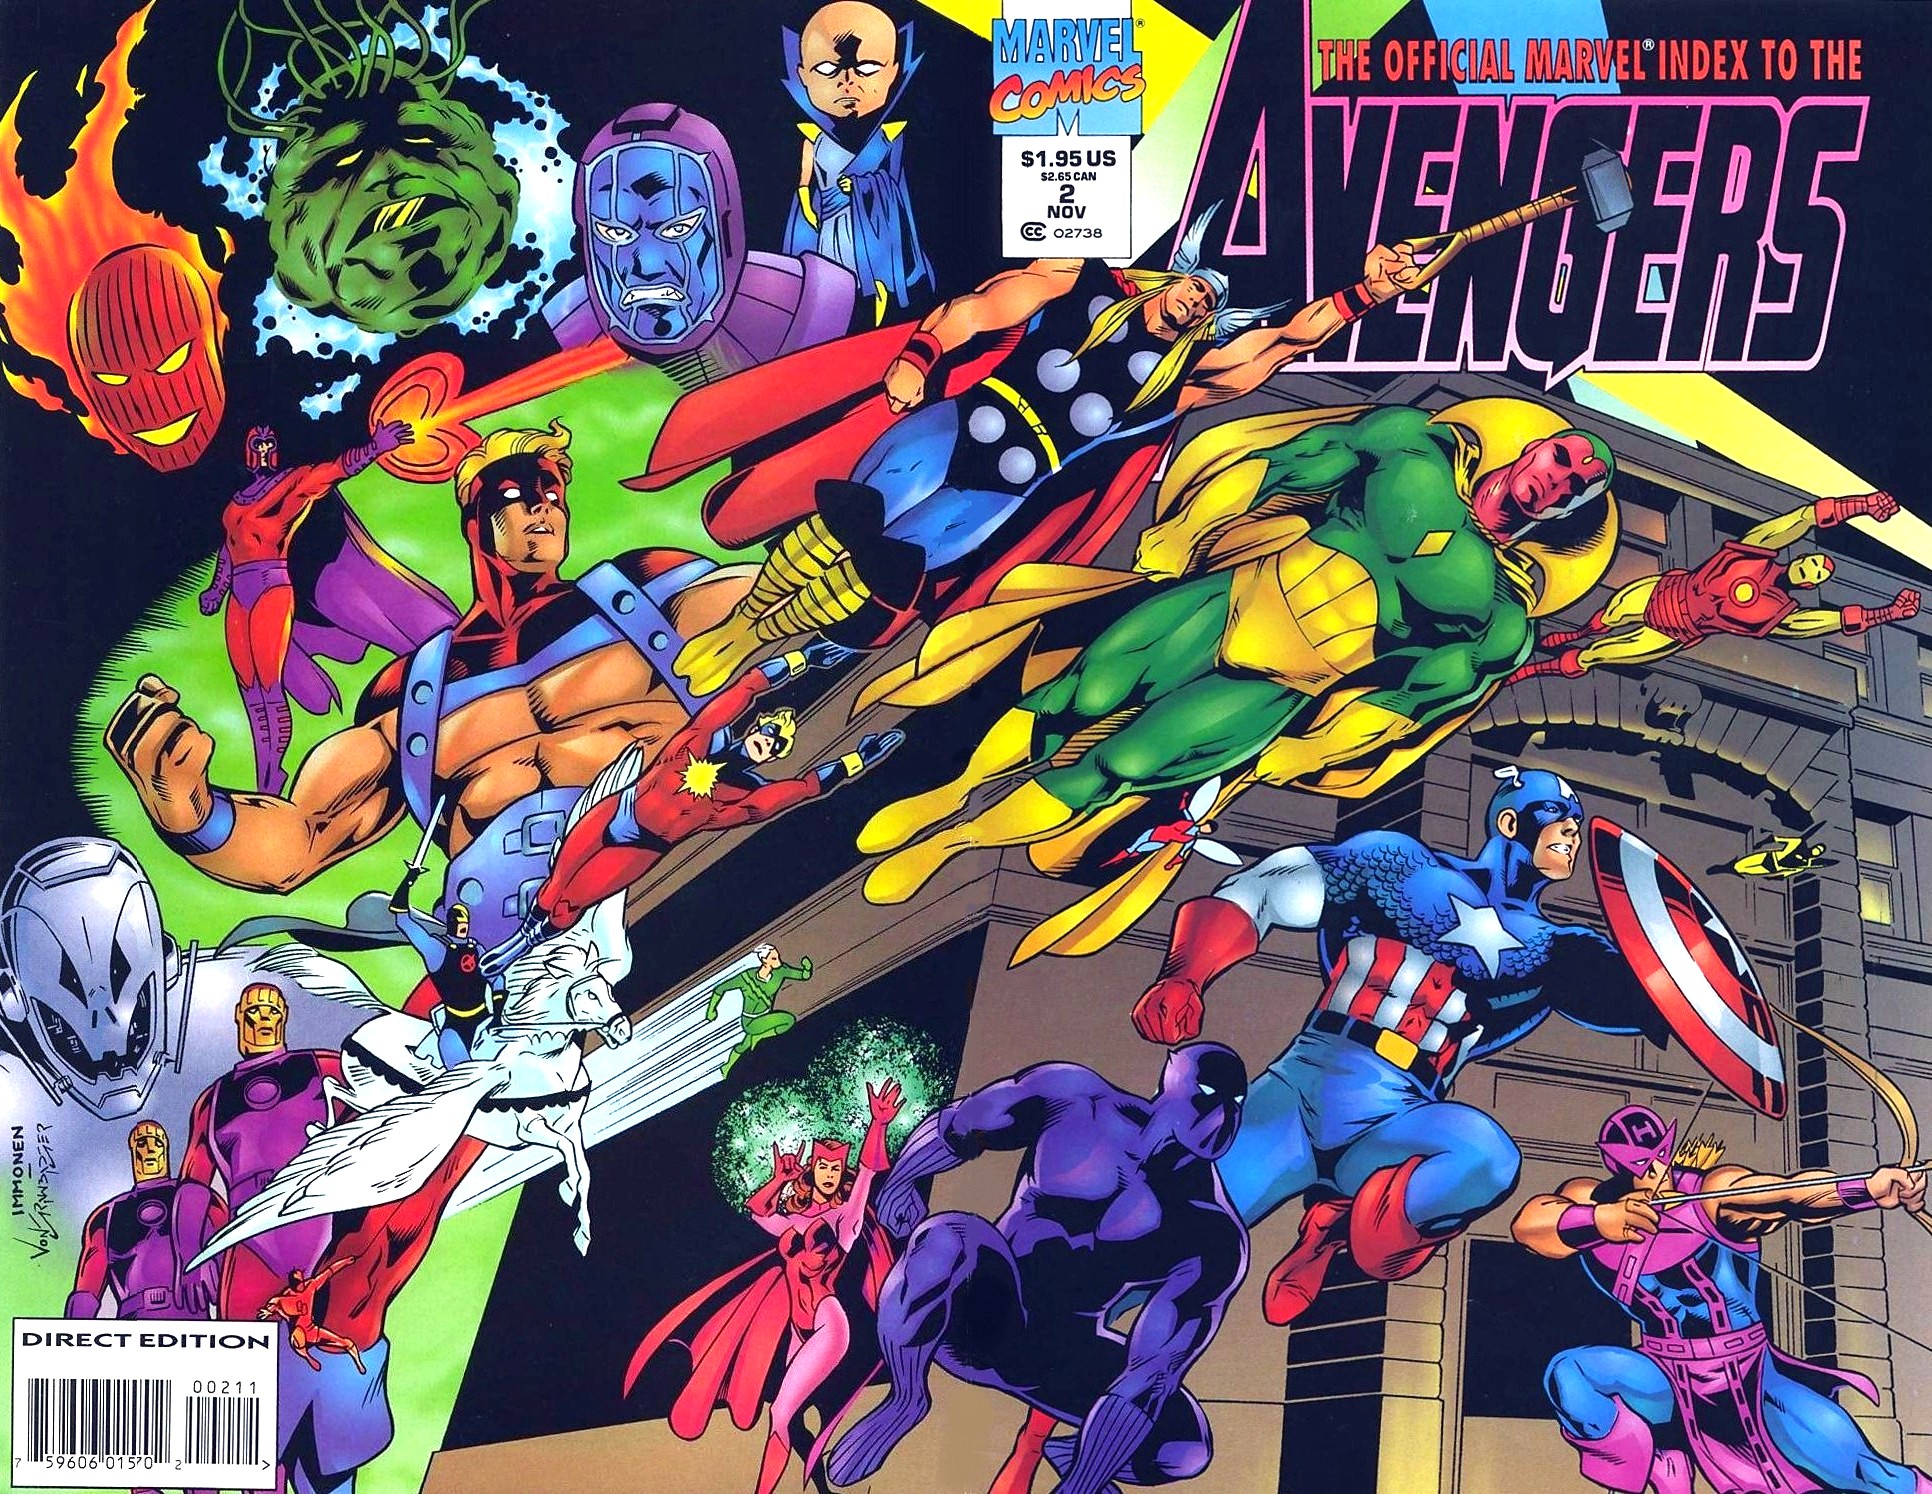 Read online The Official Marvel Index to the Avengers comic -  Issue #2 - 1